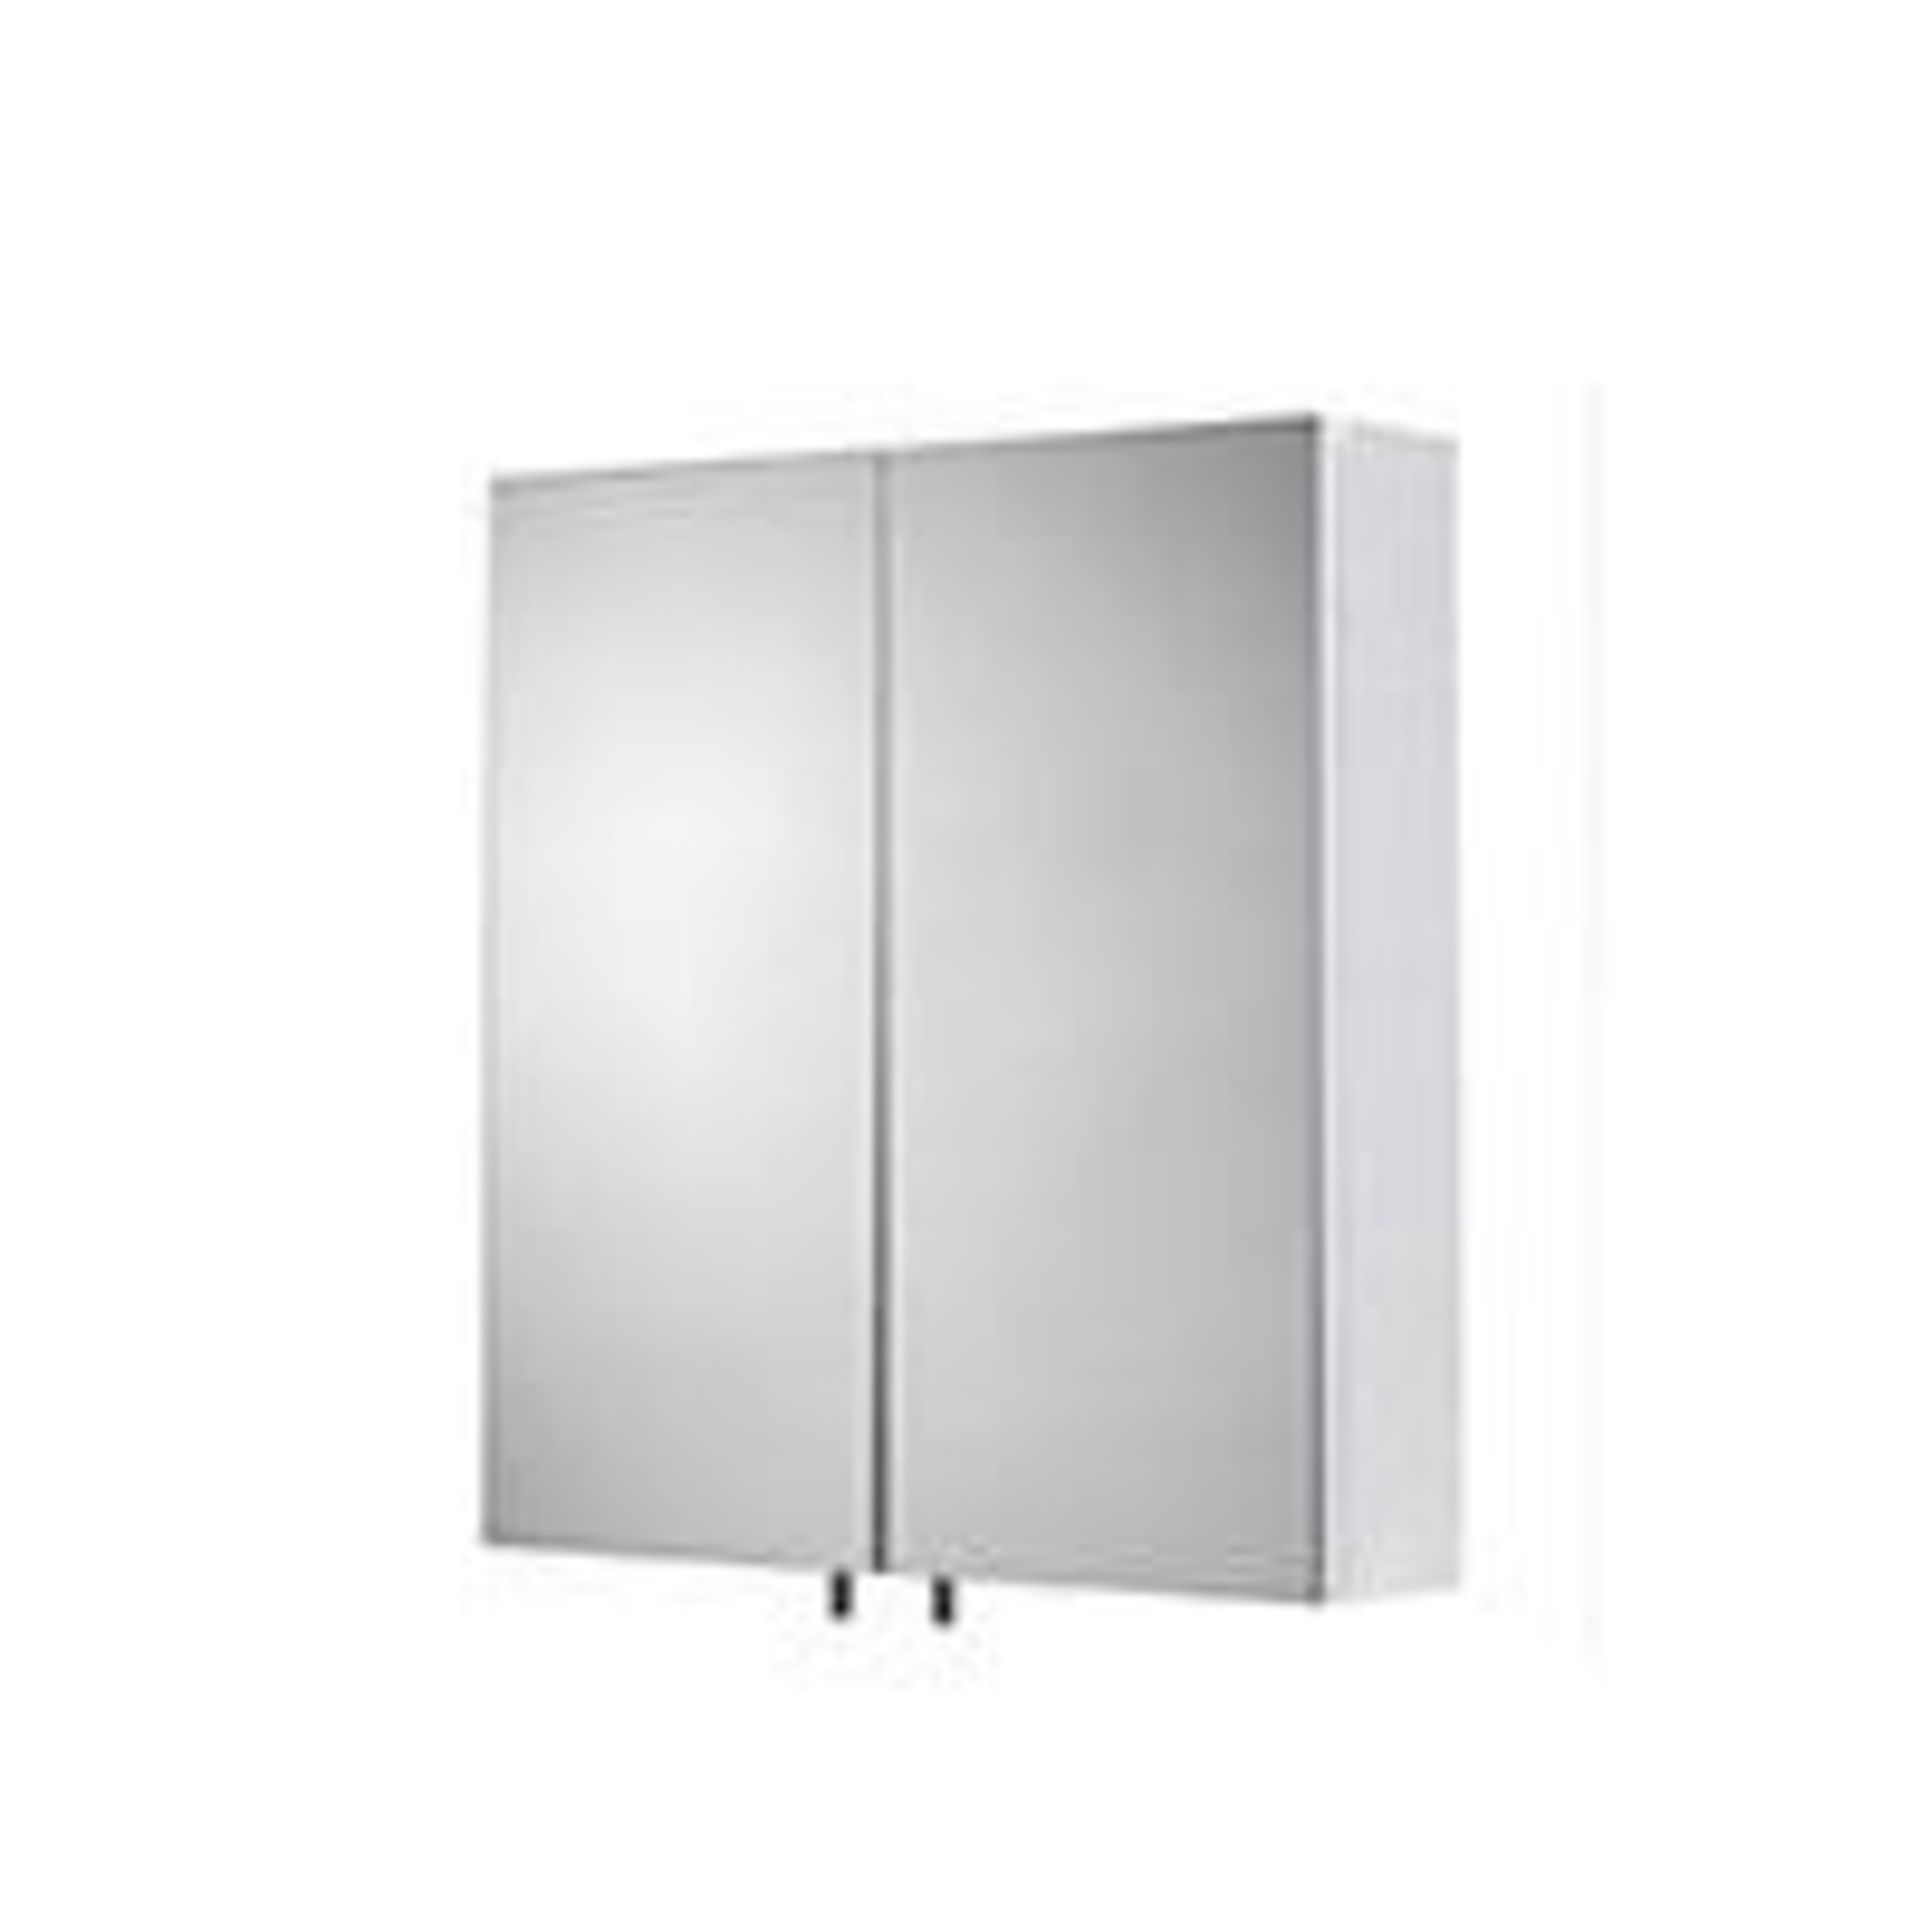 Croydex Cullen Gloss White Wall-mounted Double Bathroom Cabinet. - R14.2.